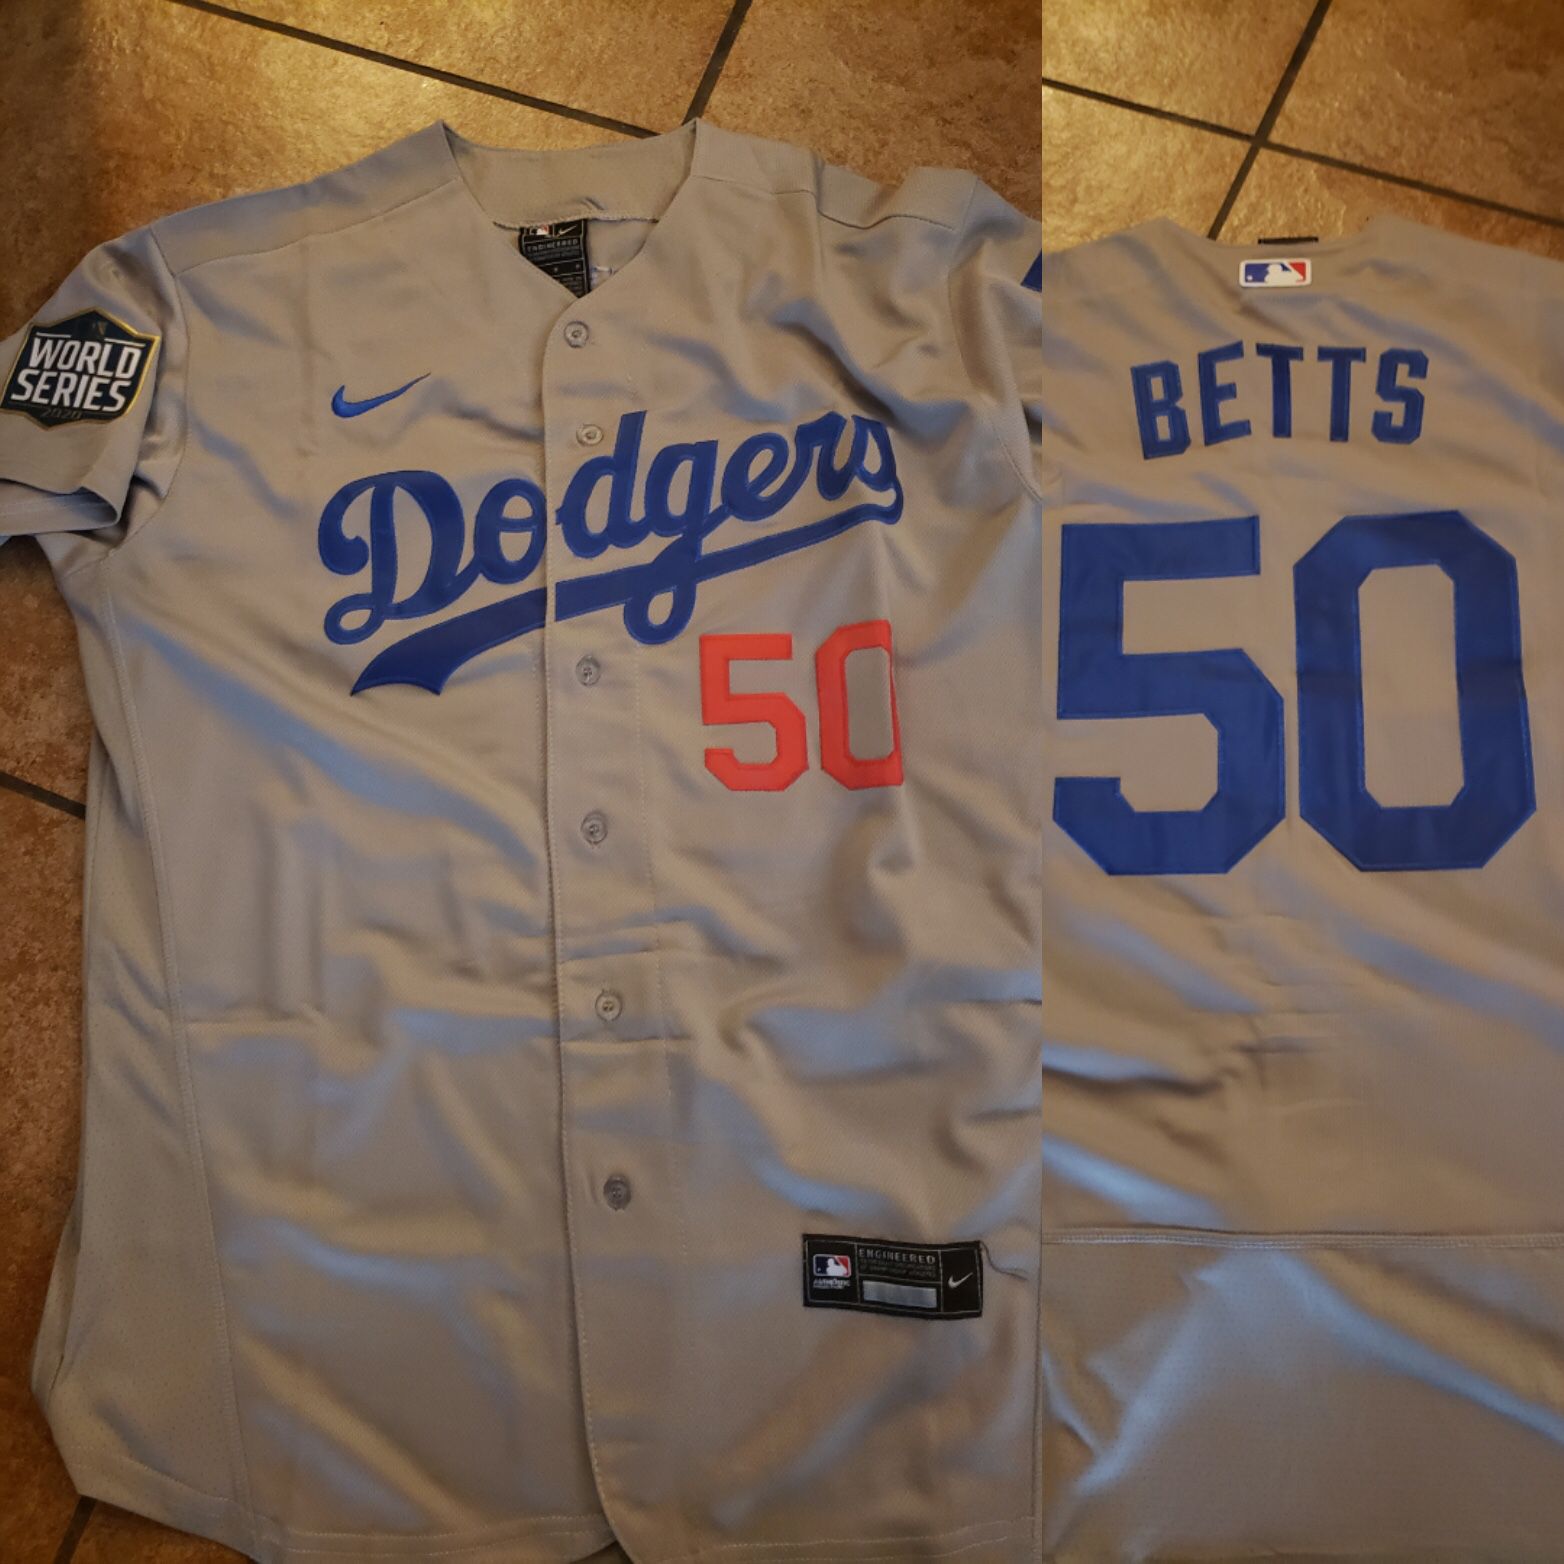 Dodgers betts jersey with World Series patch sizes Large to 3xl stitched firm price pick up only